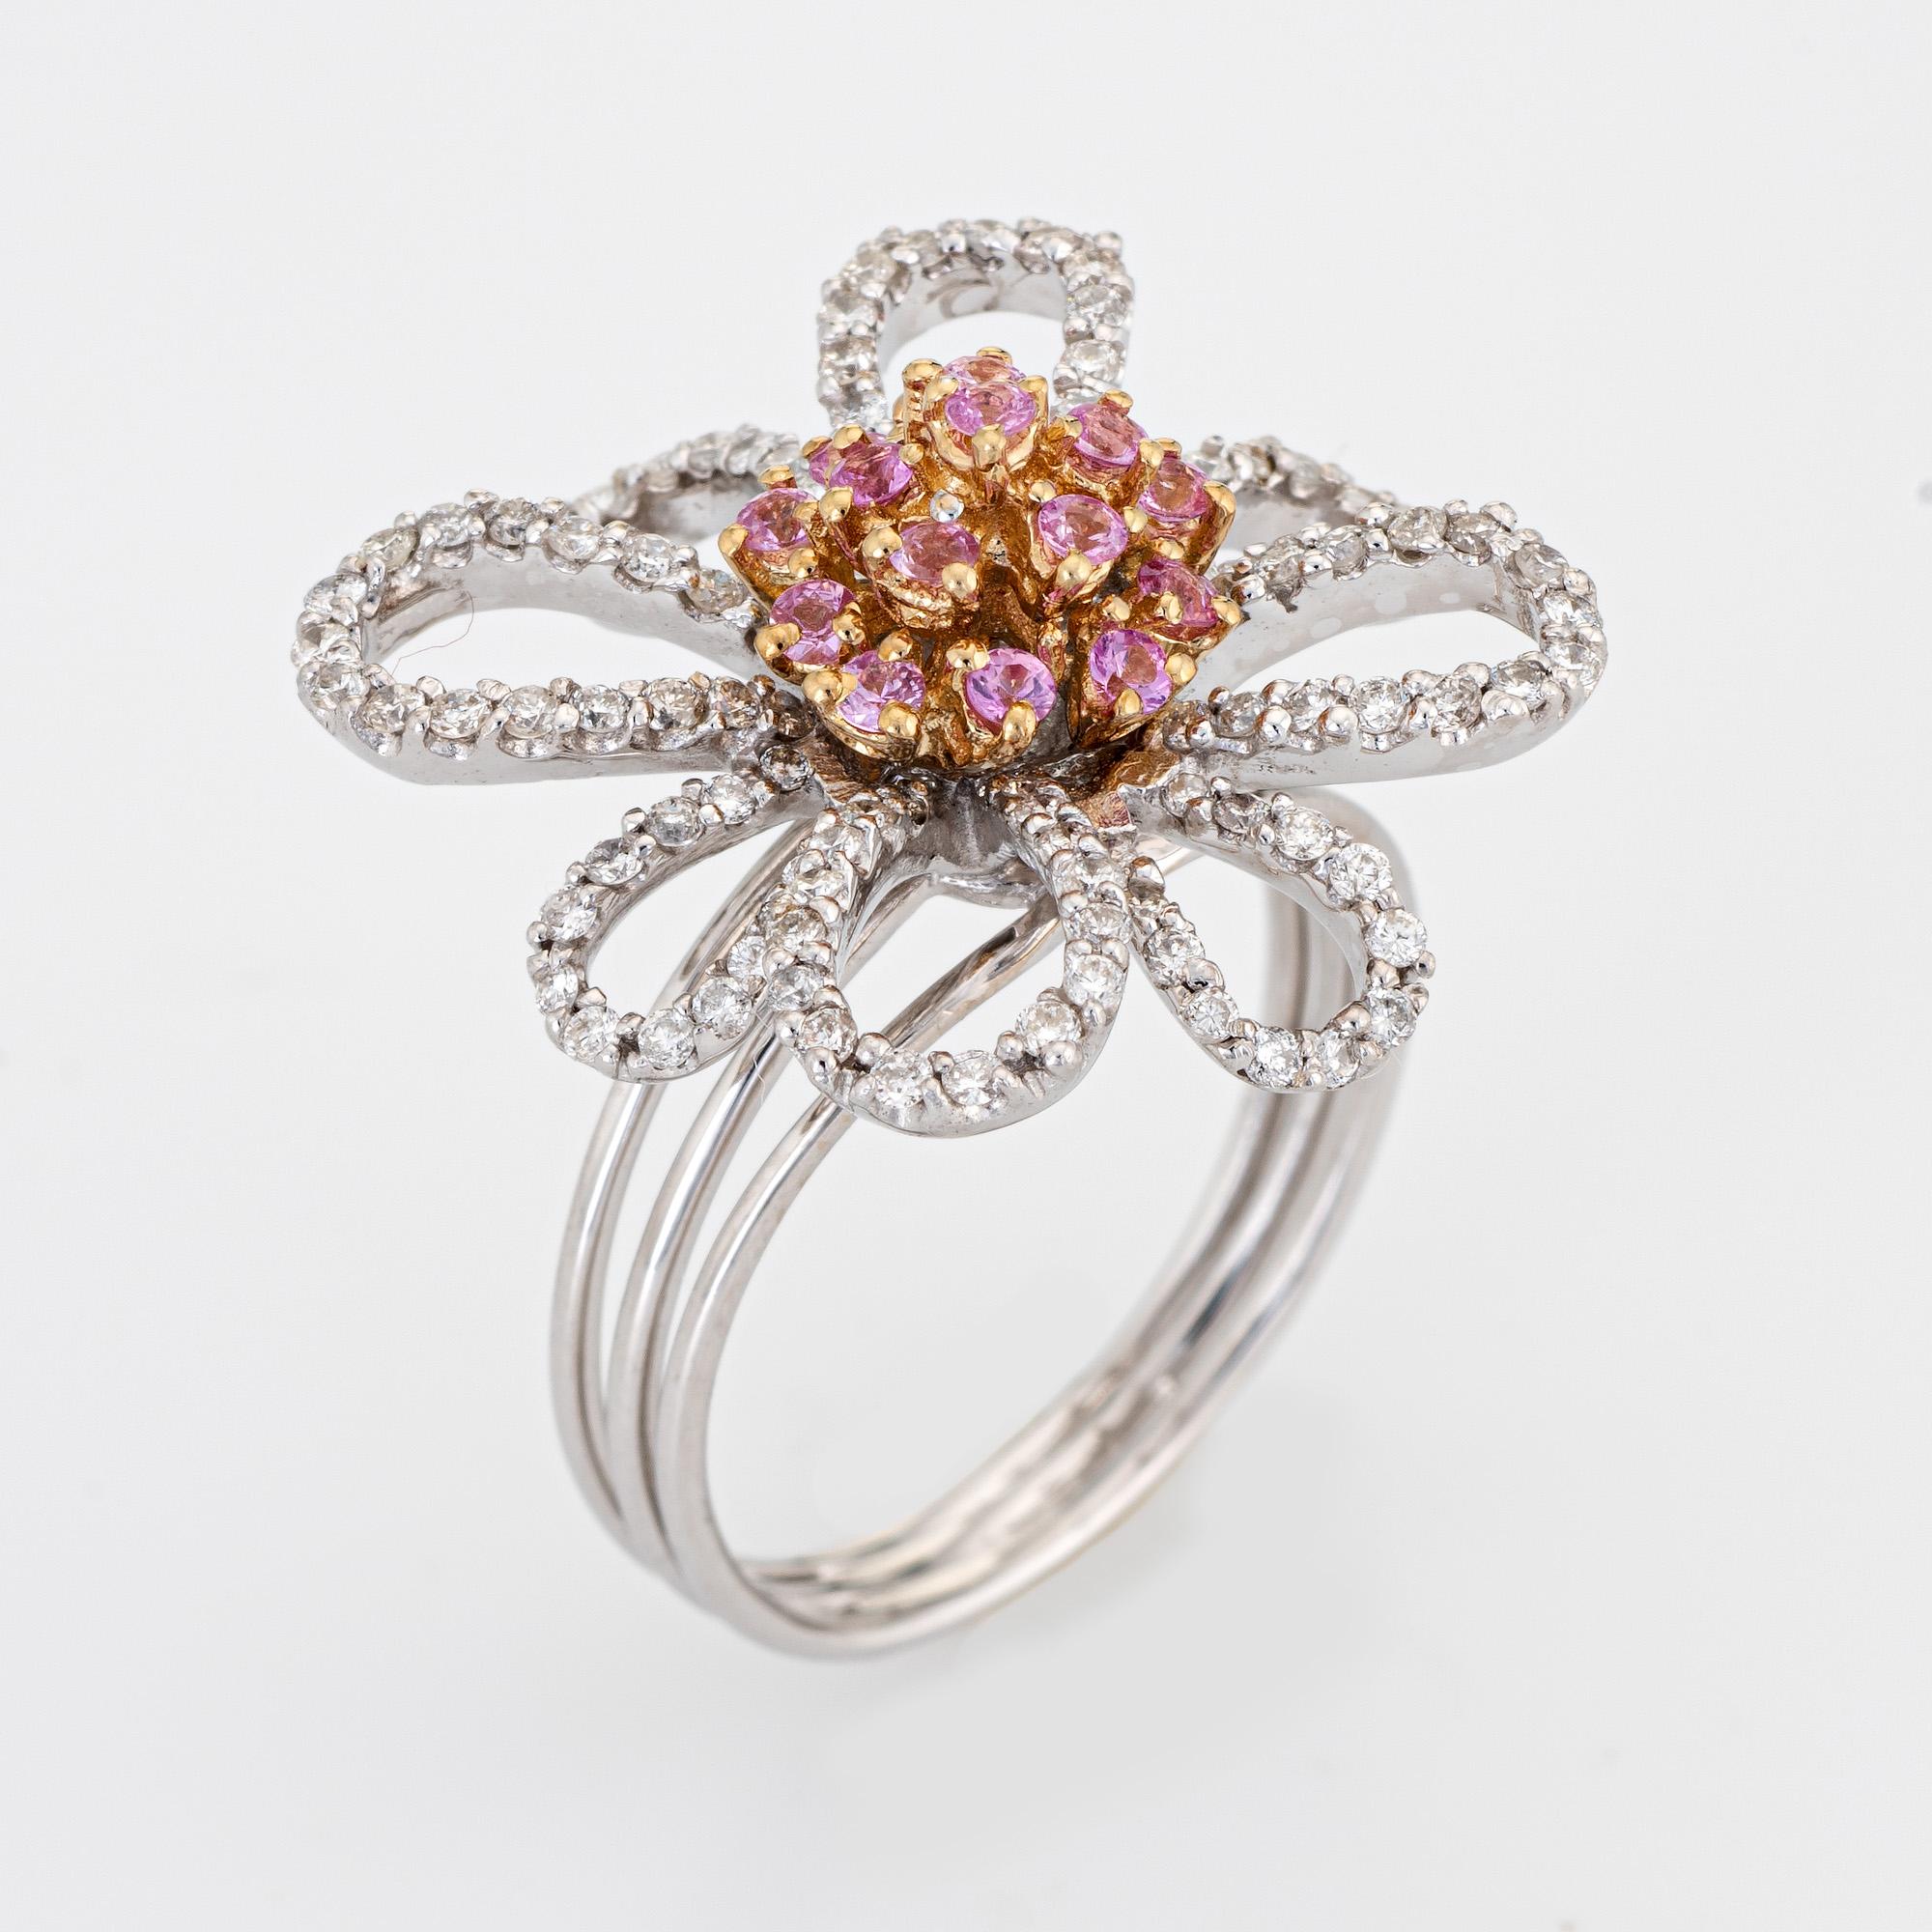 Stylish contemporary diamond & pink topaz flower ring crafted in 14 karat white gold. 

Pink topaz totals an estimated 0.37 carats. Diamonds total an estimated 0.72 carats (estimated at H-I color and SI1-I2 clarity). 

Diamonds adorns the petals,